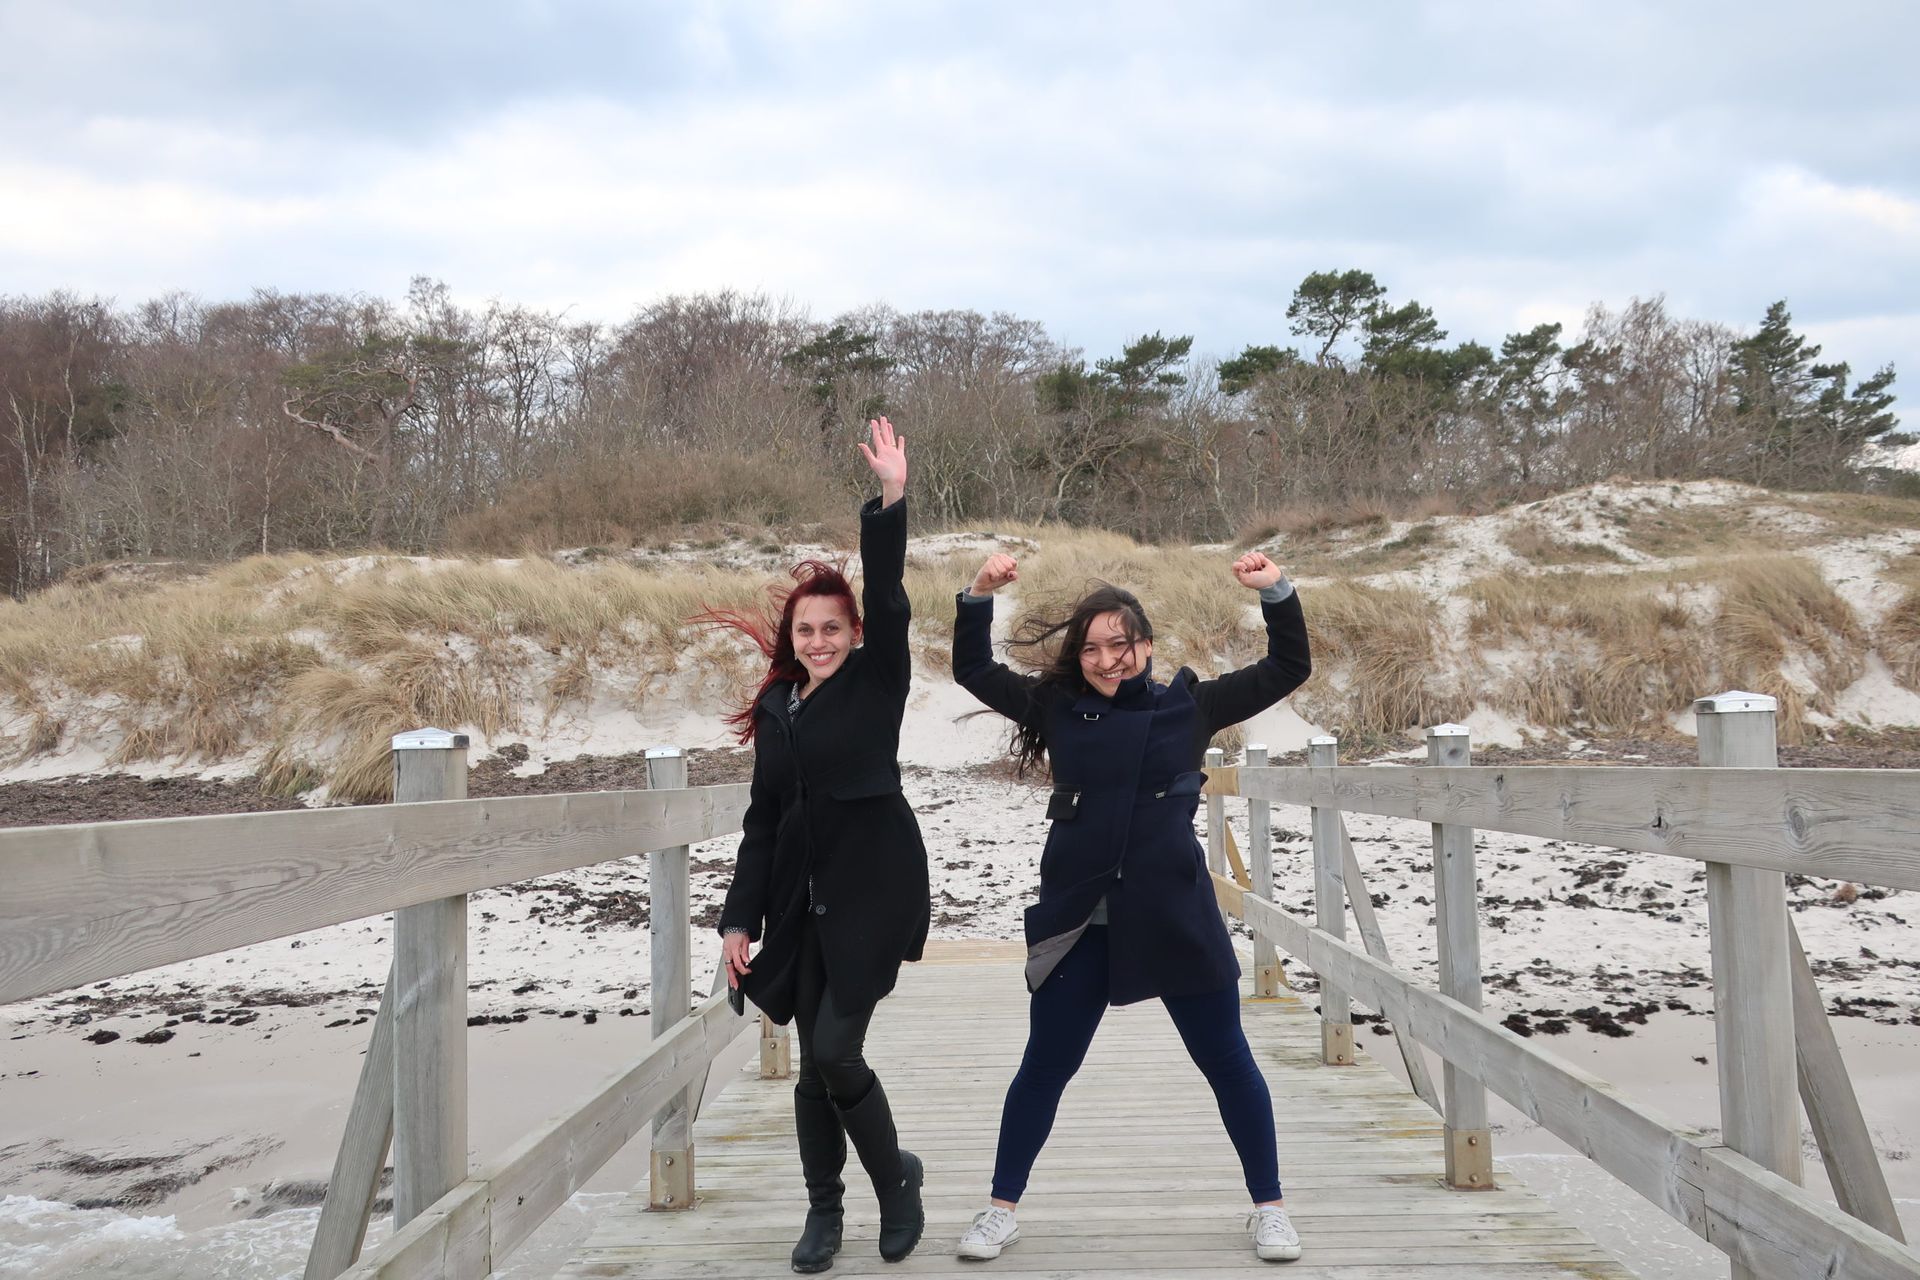 Two women cheering and jumping up and down on a jetty on a windy day. They are both wearing winter jackets.